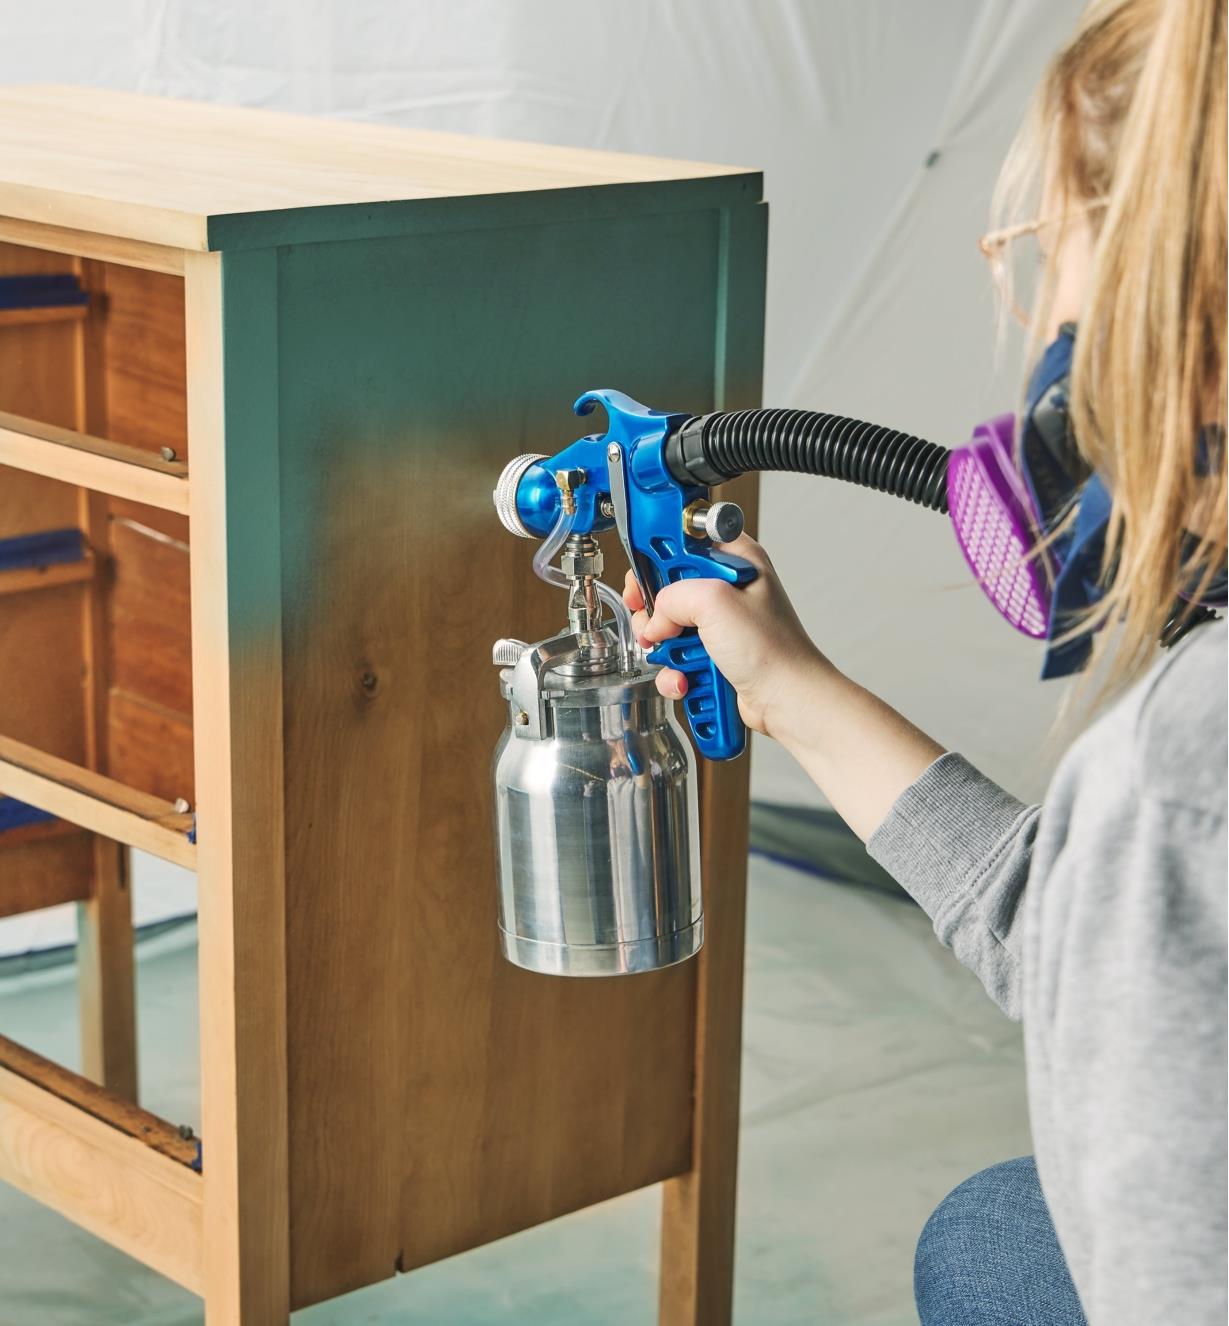 Spraying finish on a wooden chest using the Earlex spray station